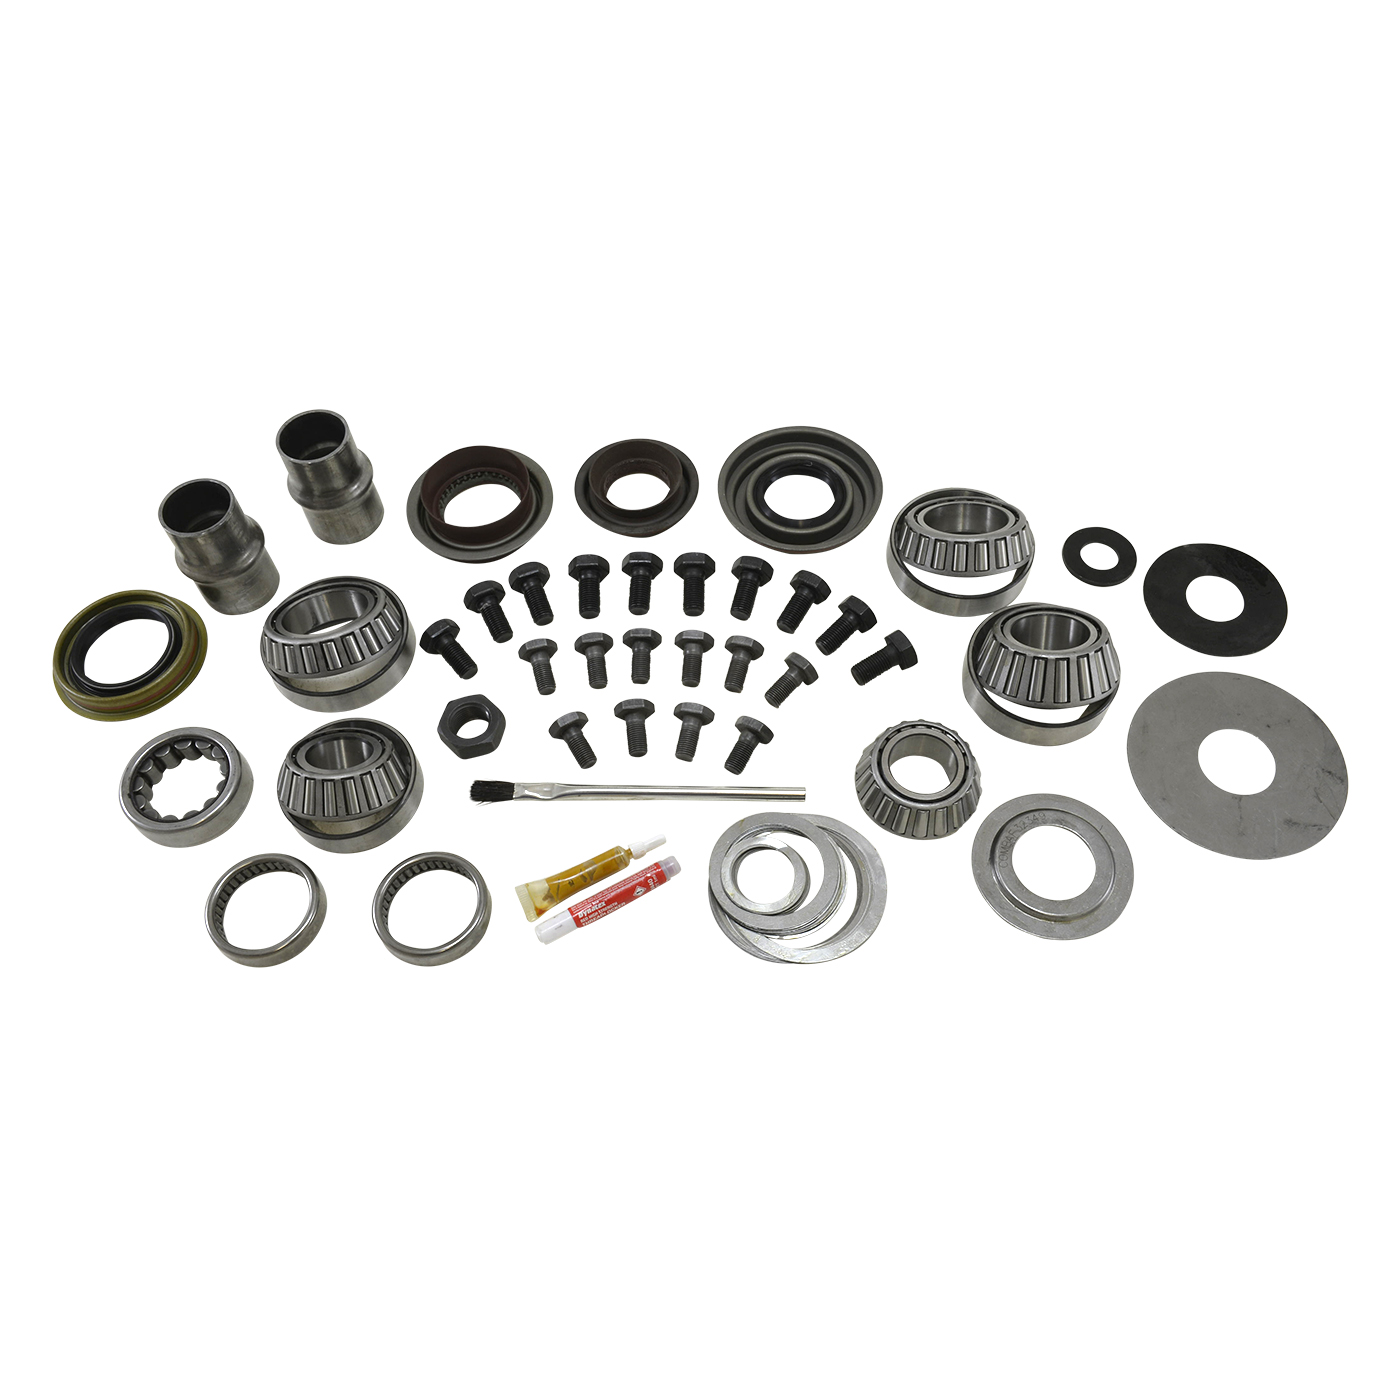 Master Overhaul Kit For Dana  in.Super in. 30 Differential, '01-'05 Ford Front